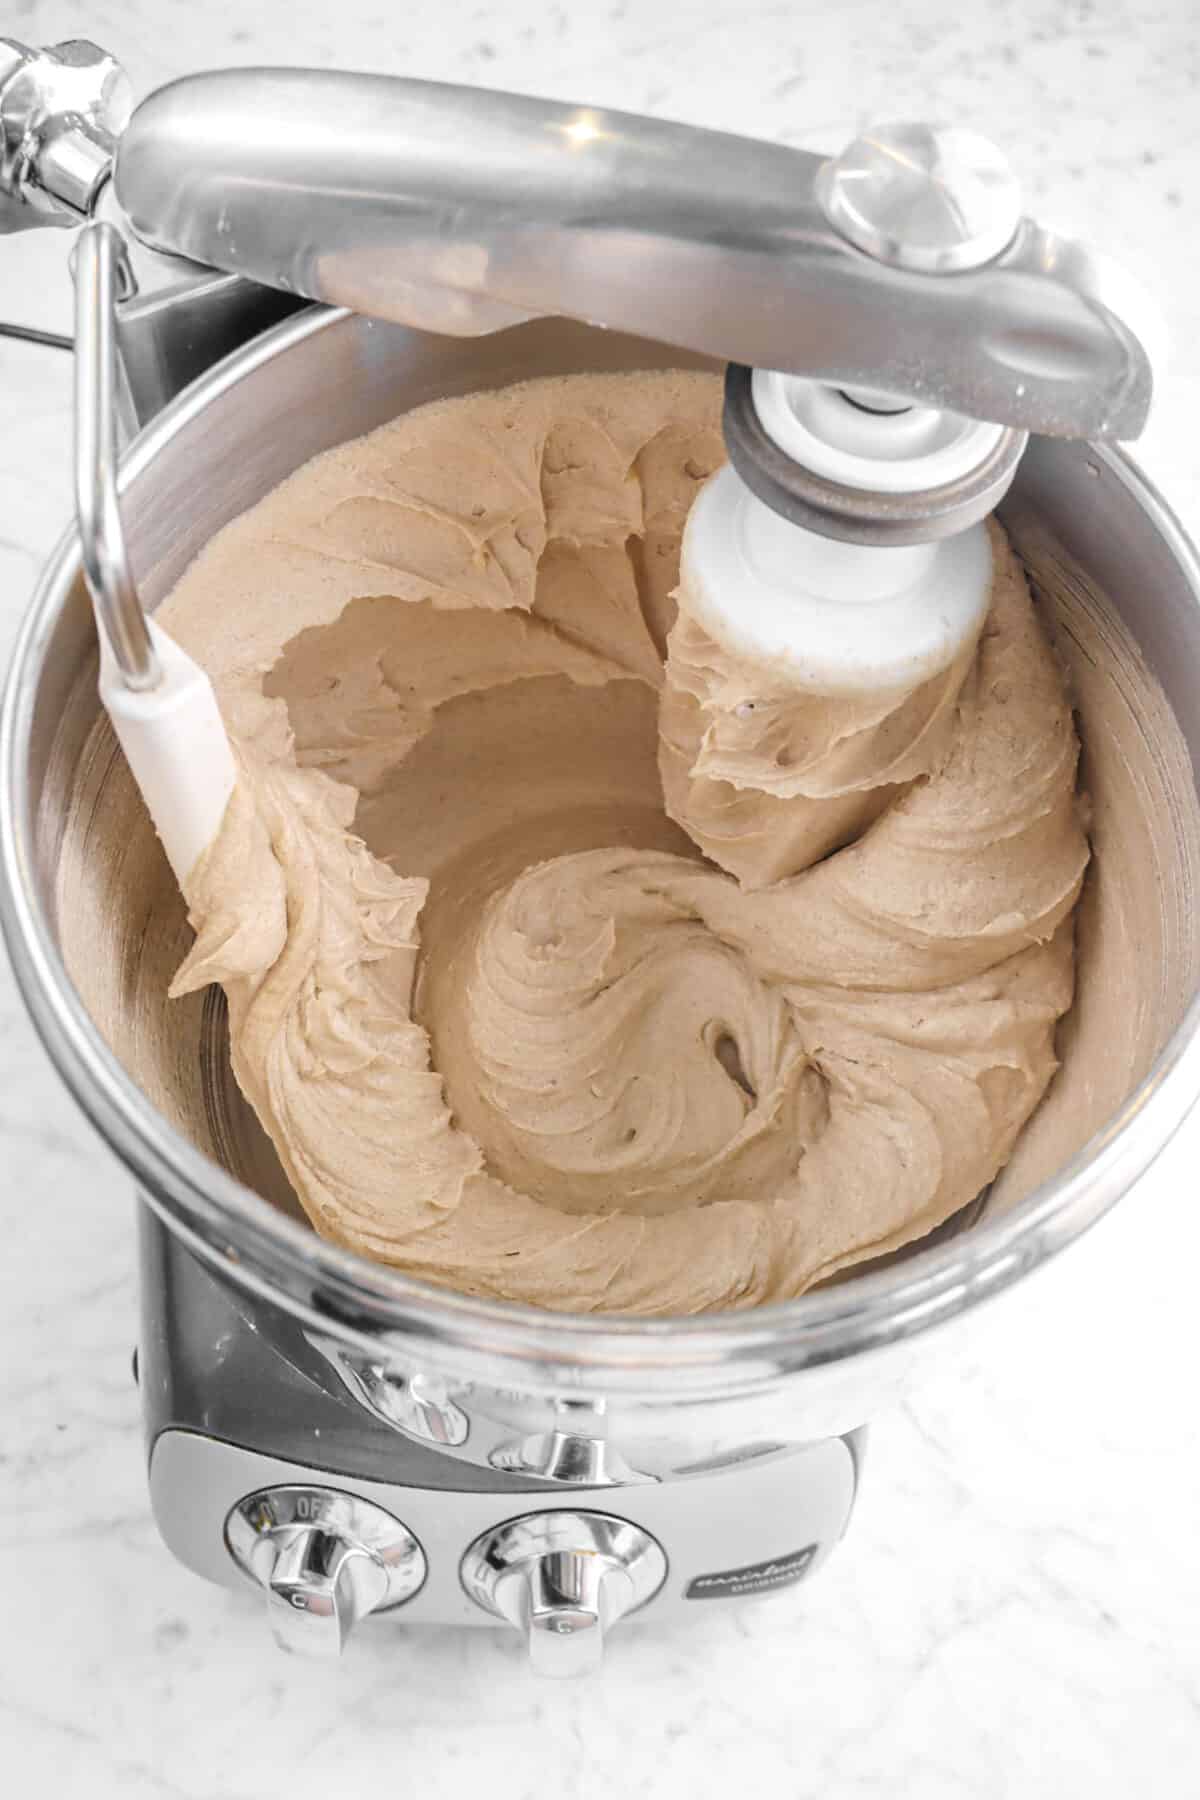 dry ingredients stirred into spice cake batter